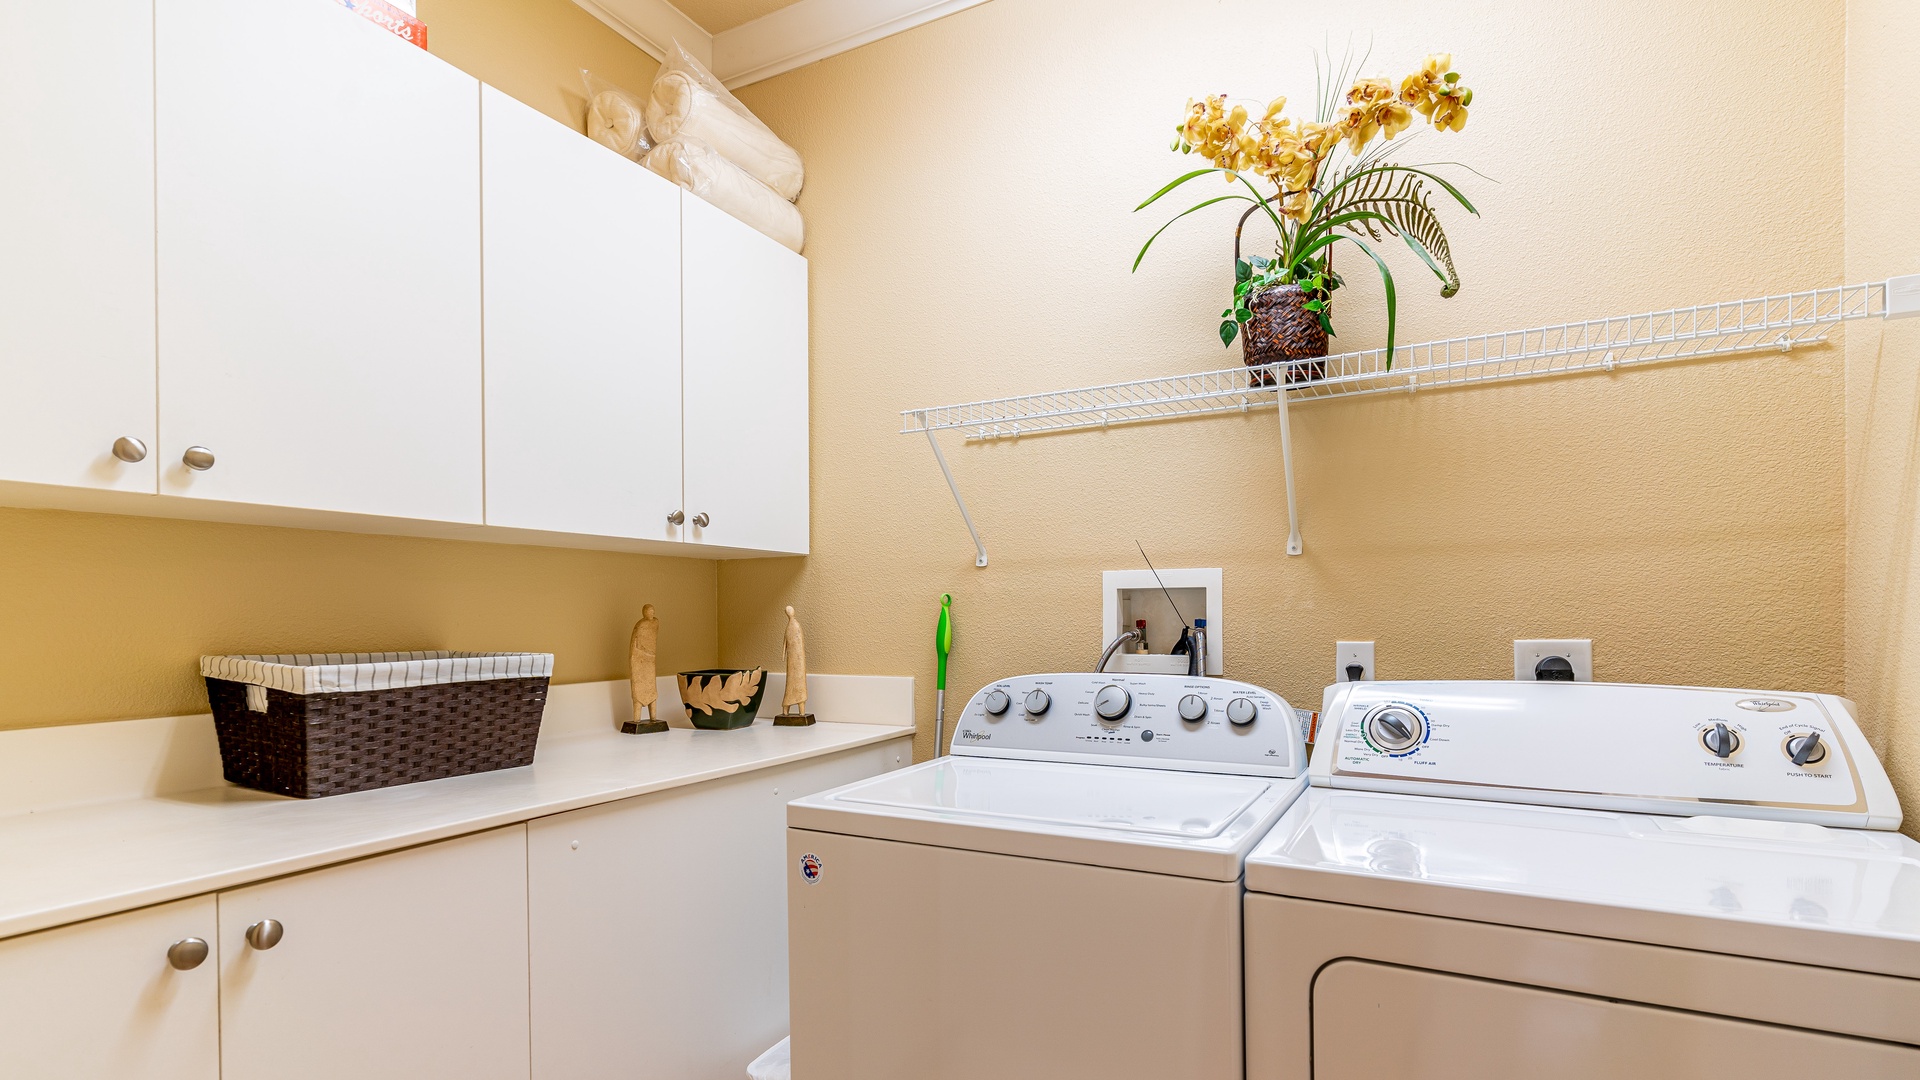 Kapolei Vacation Rentals, Coconut Plantation 1174-2 - Laundry room with washer, dryer, and cabinetry.